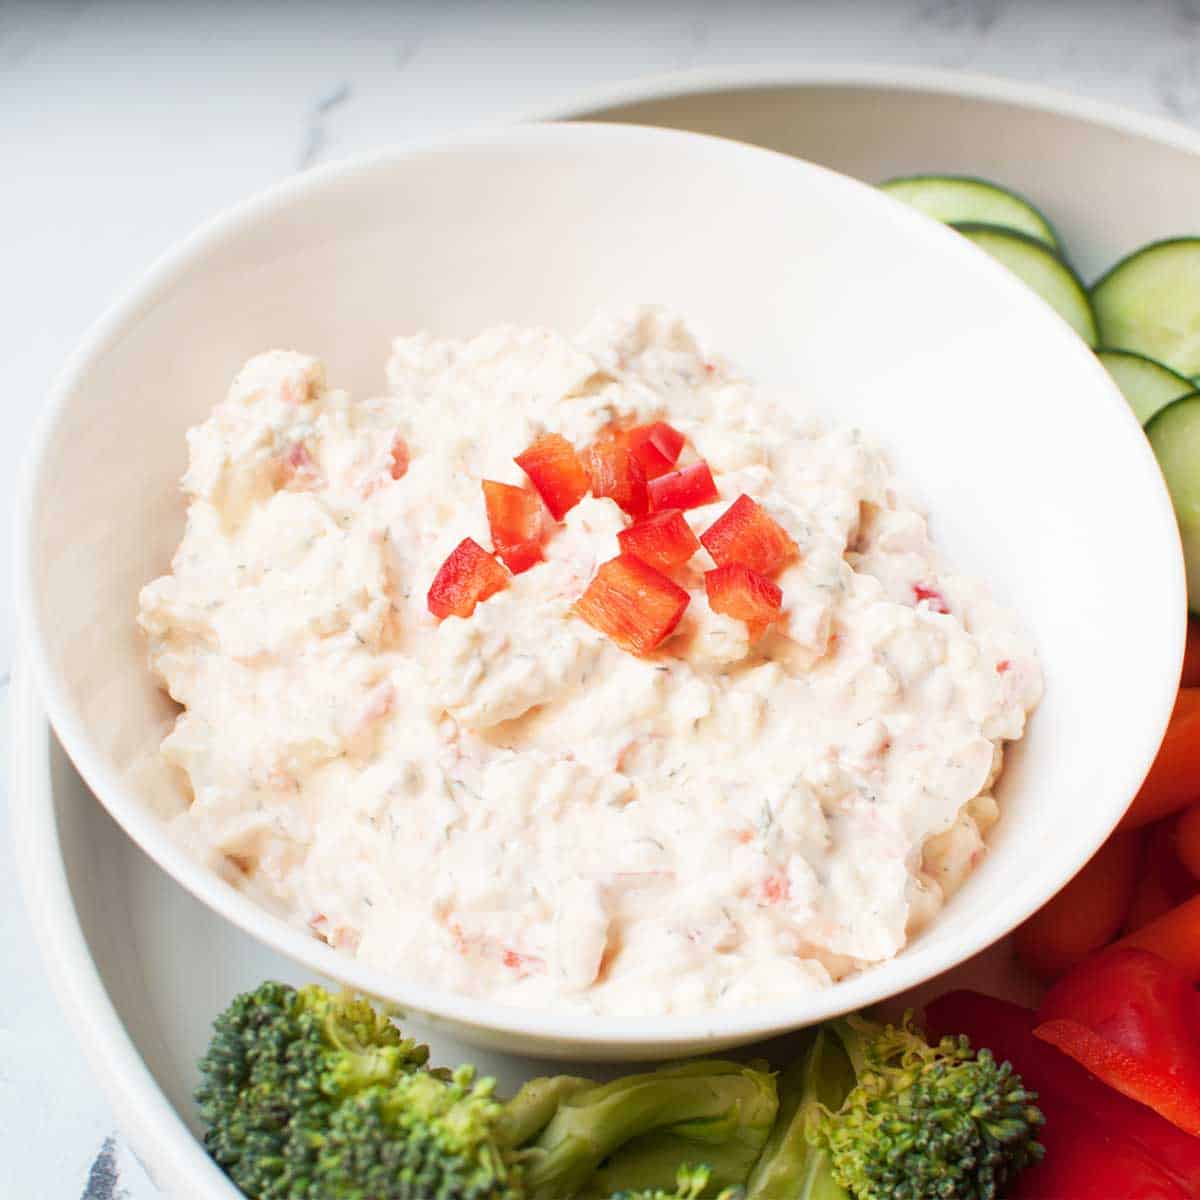 cream cheese dip in a bowl with red bell peppers that have been diced on top of it